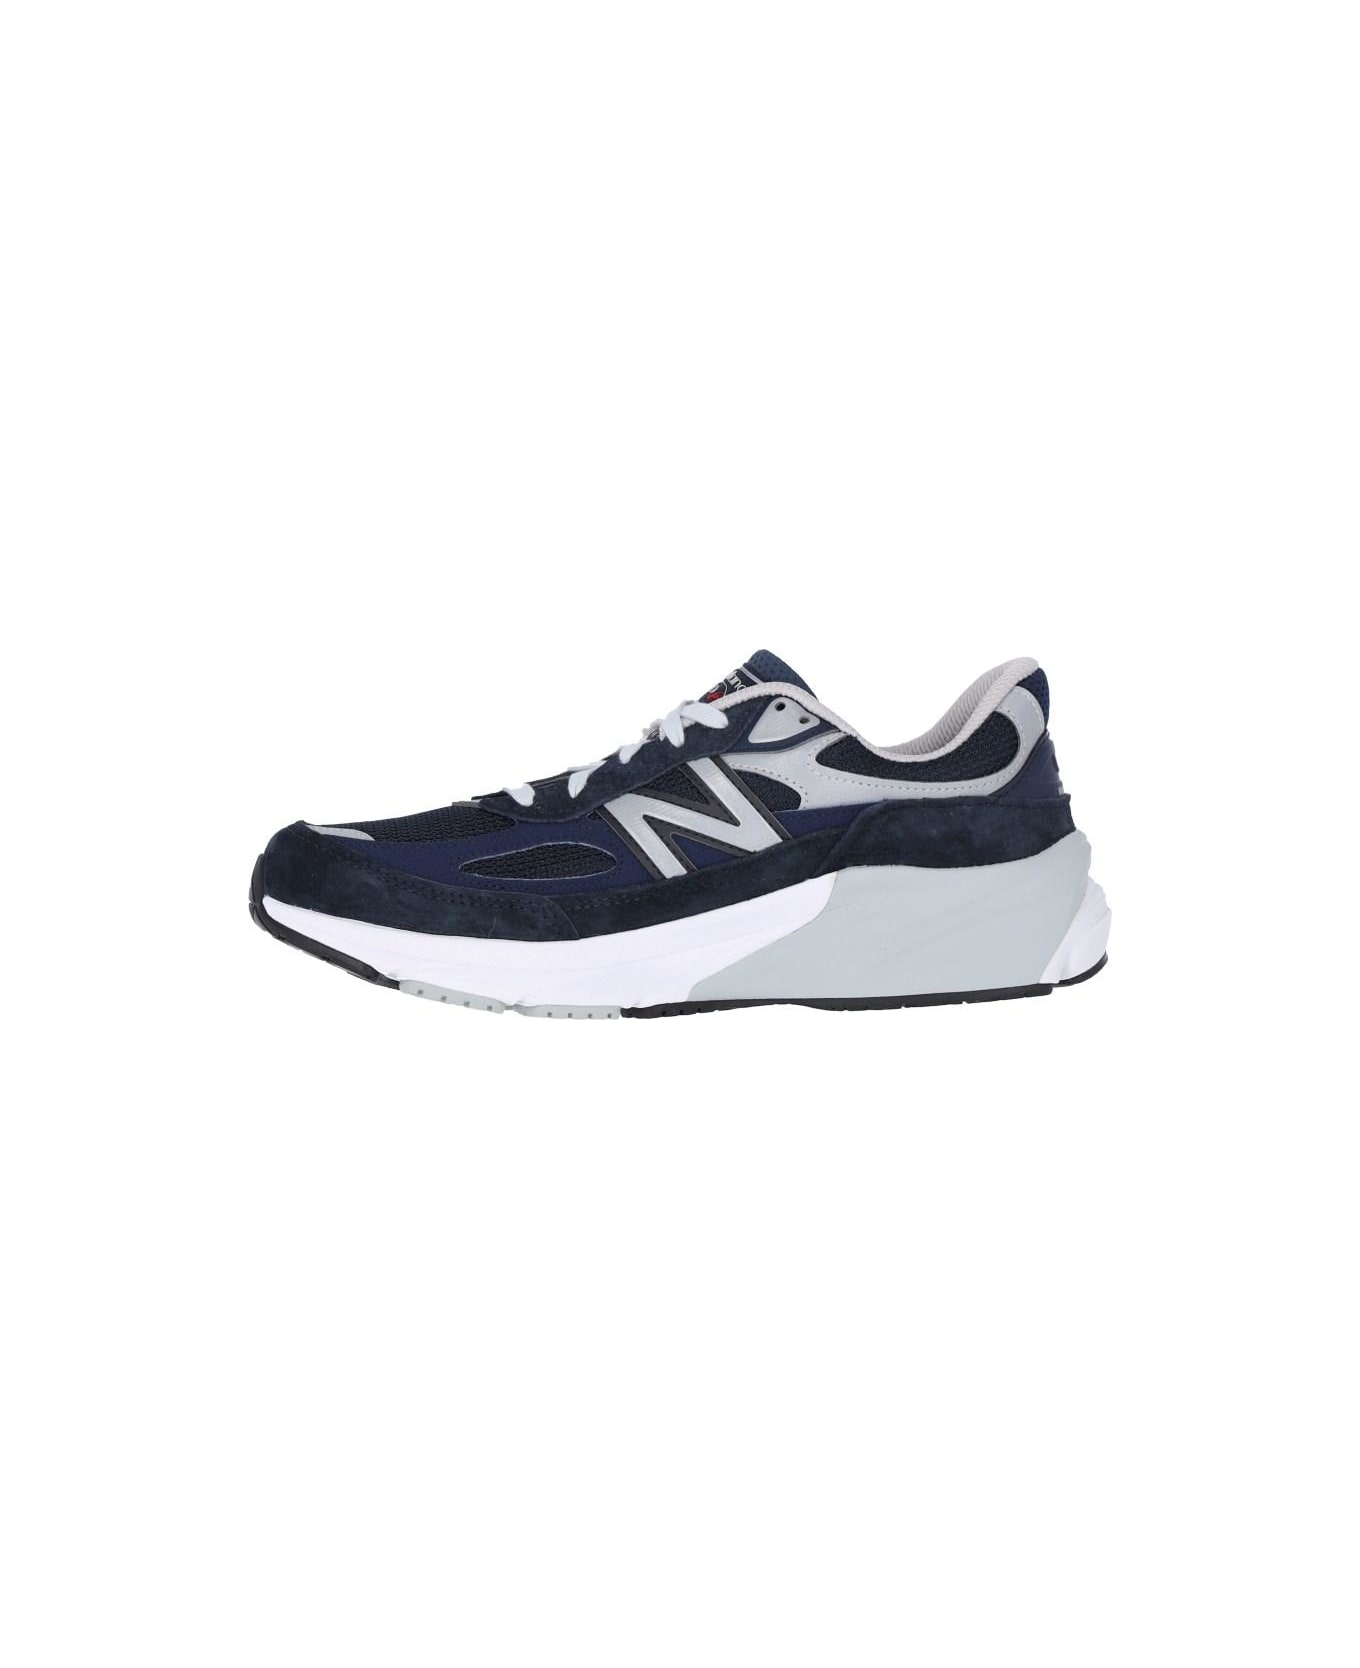 New Balance 'made In Usa 990v6' Sneakers - BLUE スニーカー